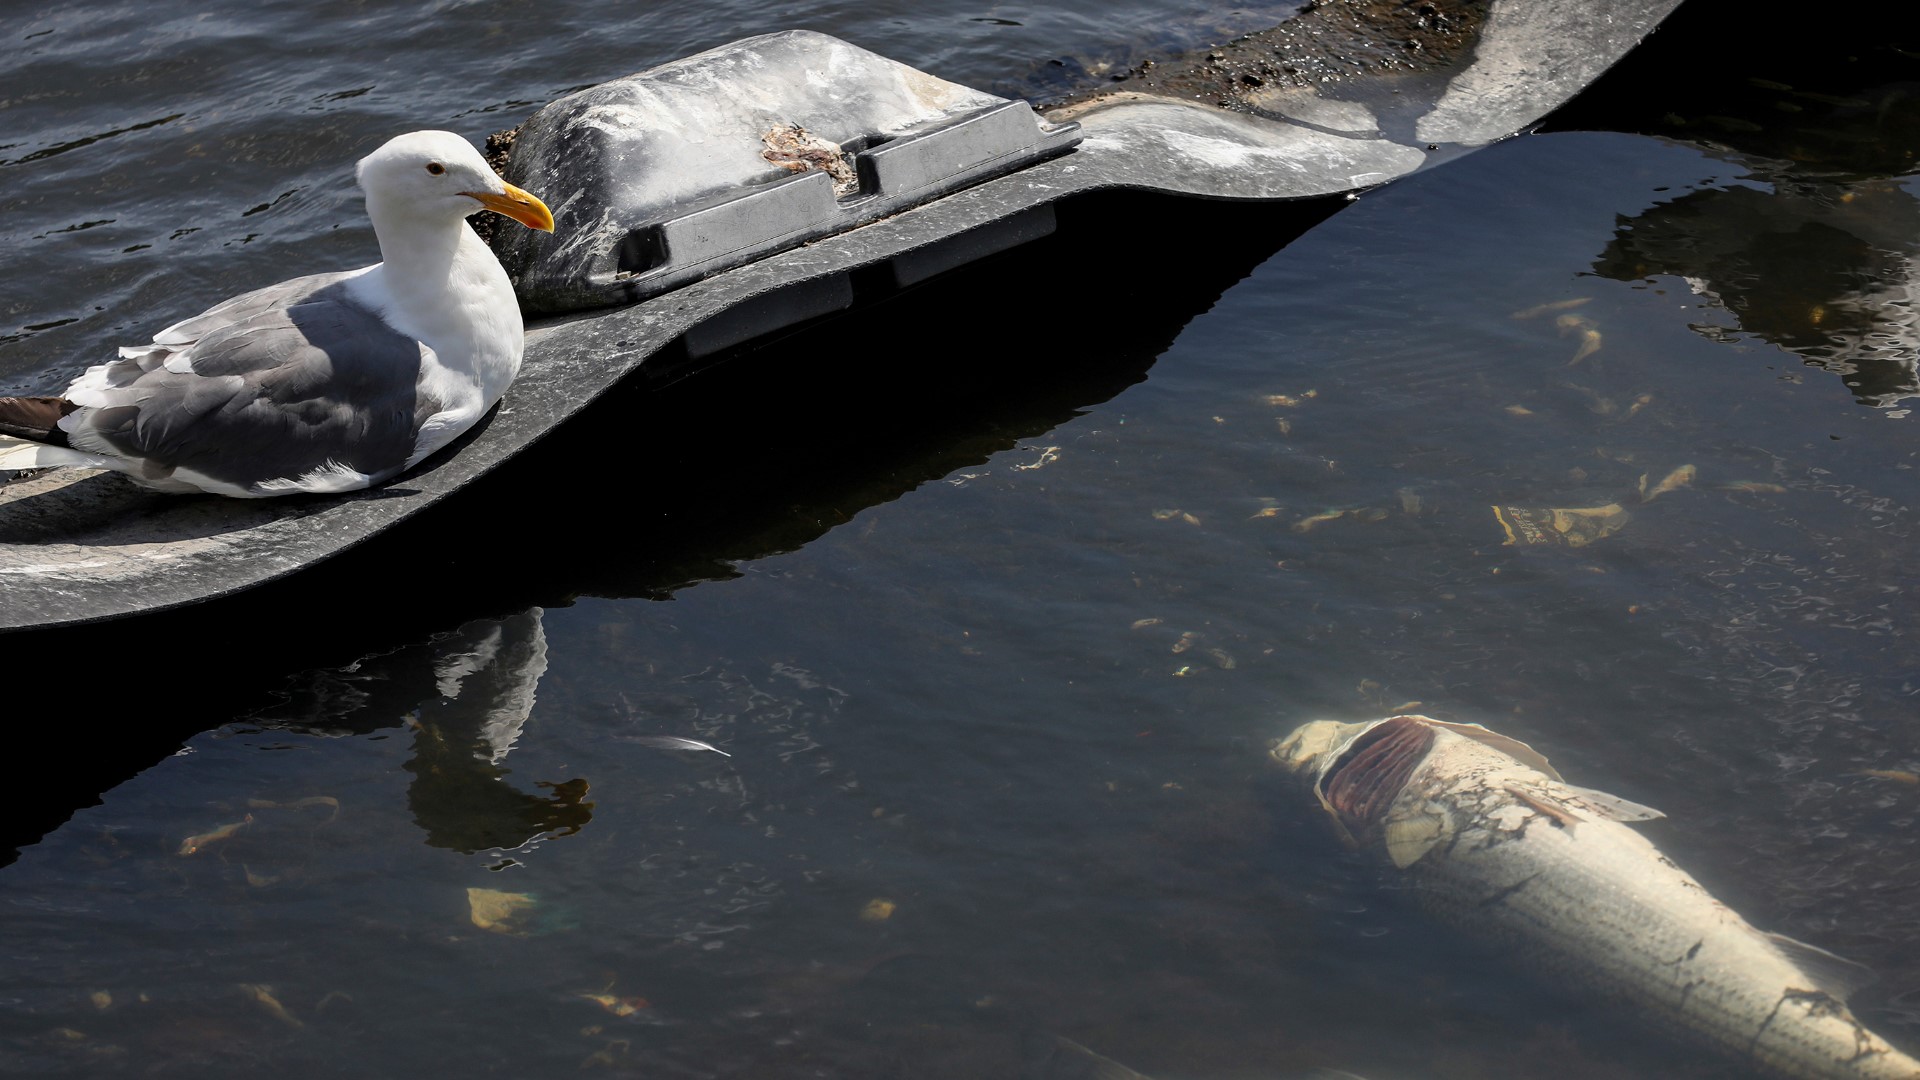 The fish die-off at Lake Merritt and at spots throughout the Bay Area may be due to a harmful algae bloom that has been spreading across the bay since late July.